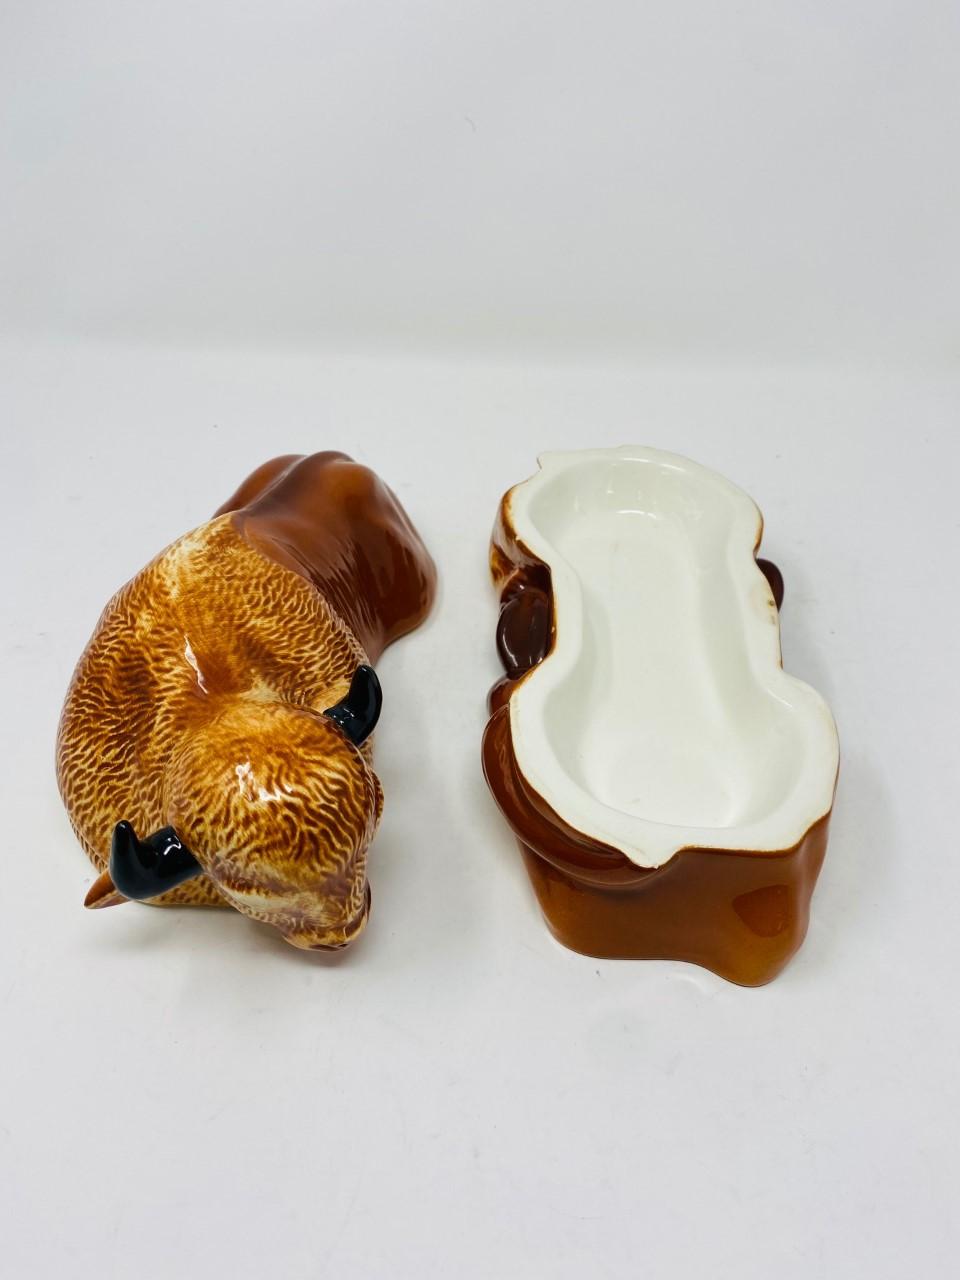 Large French Faience Figural Bison Pate Terrine by Michel Caugant For Sale 1